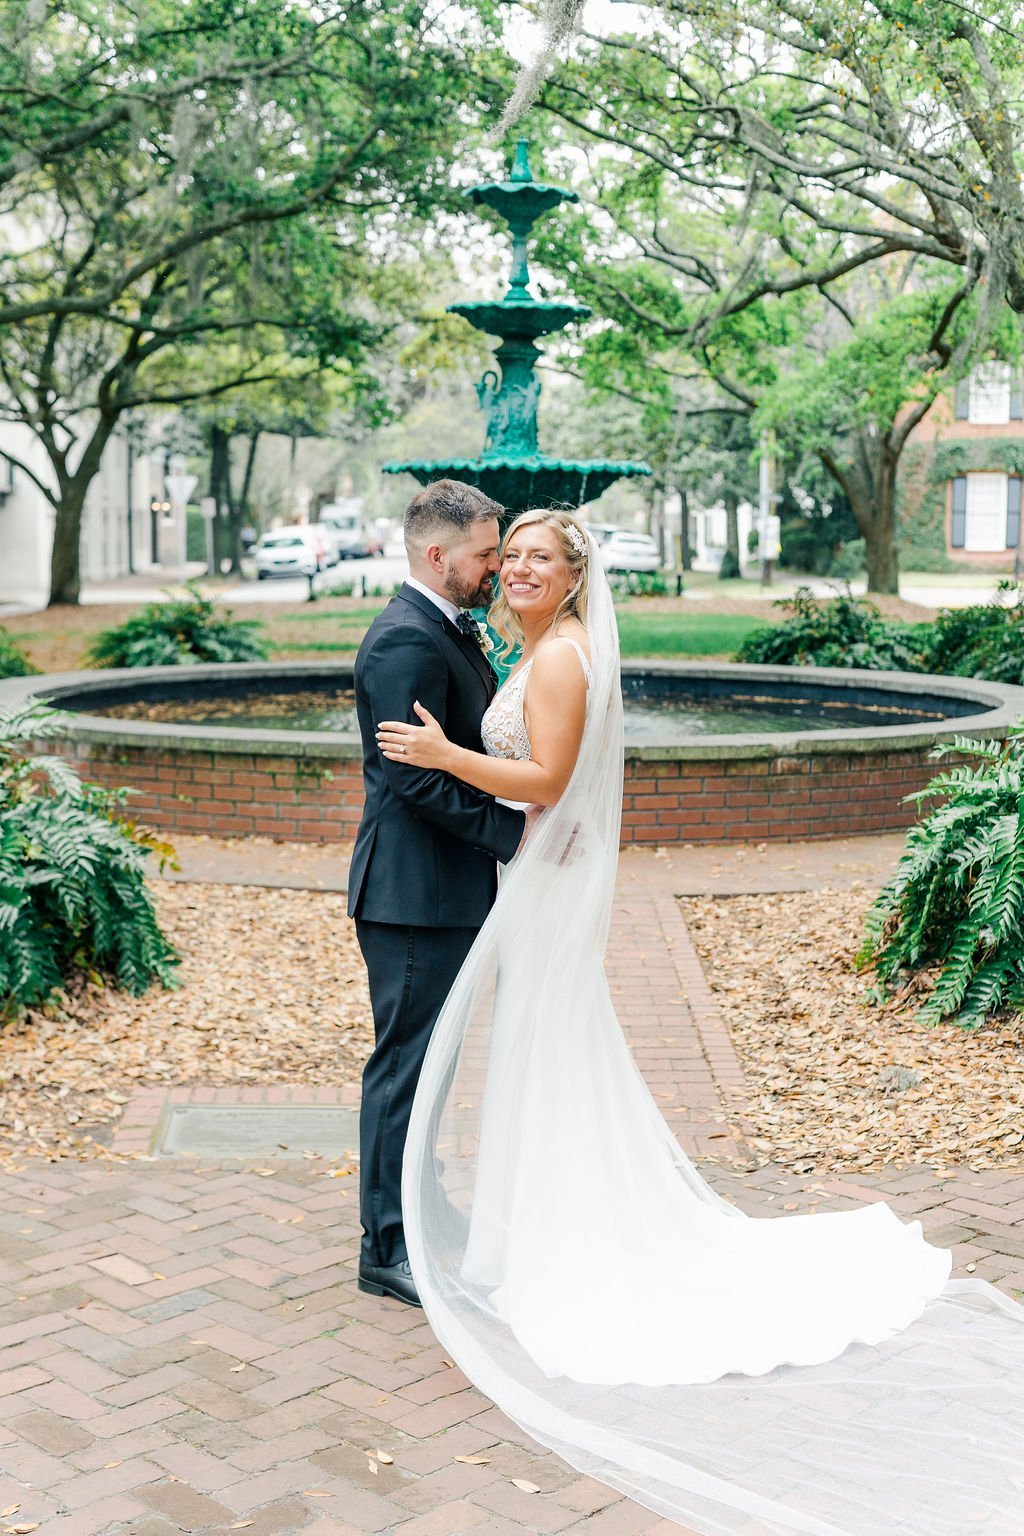 claudia-and-travis-romantic-southern-wedding-at-the-georgia-state-railroad-museum-in-savannah-georgia-planned-by-savannah-wedding-planner-and-savannah-florist-ivory-and-beau-2.jpg